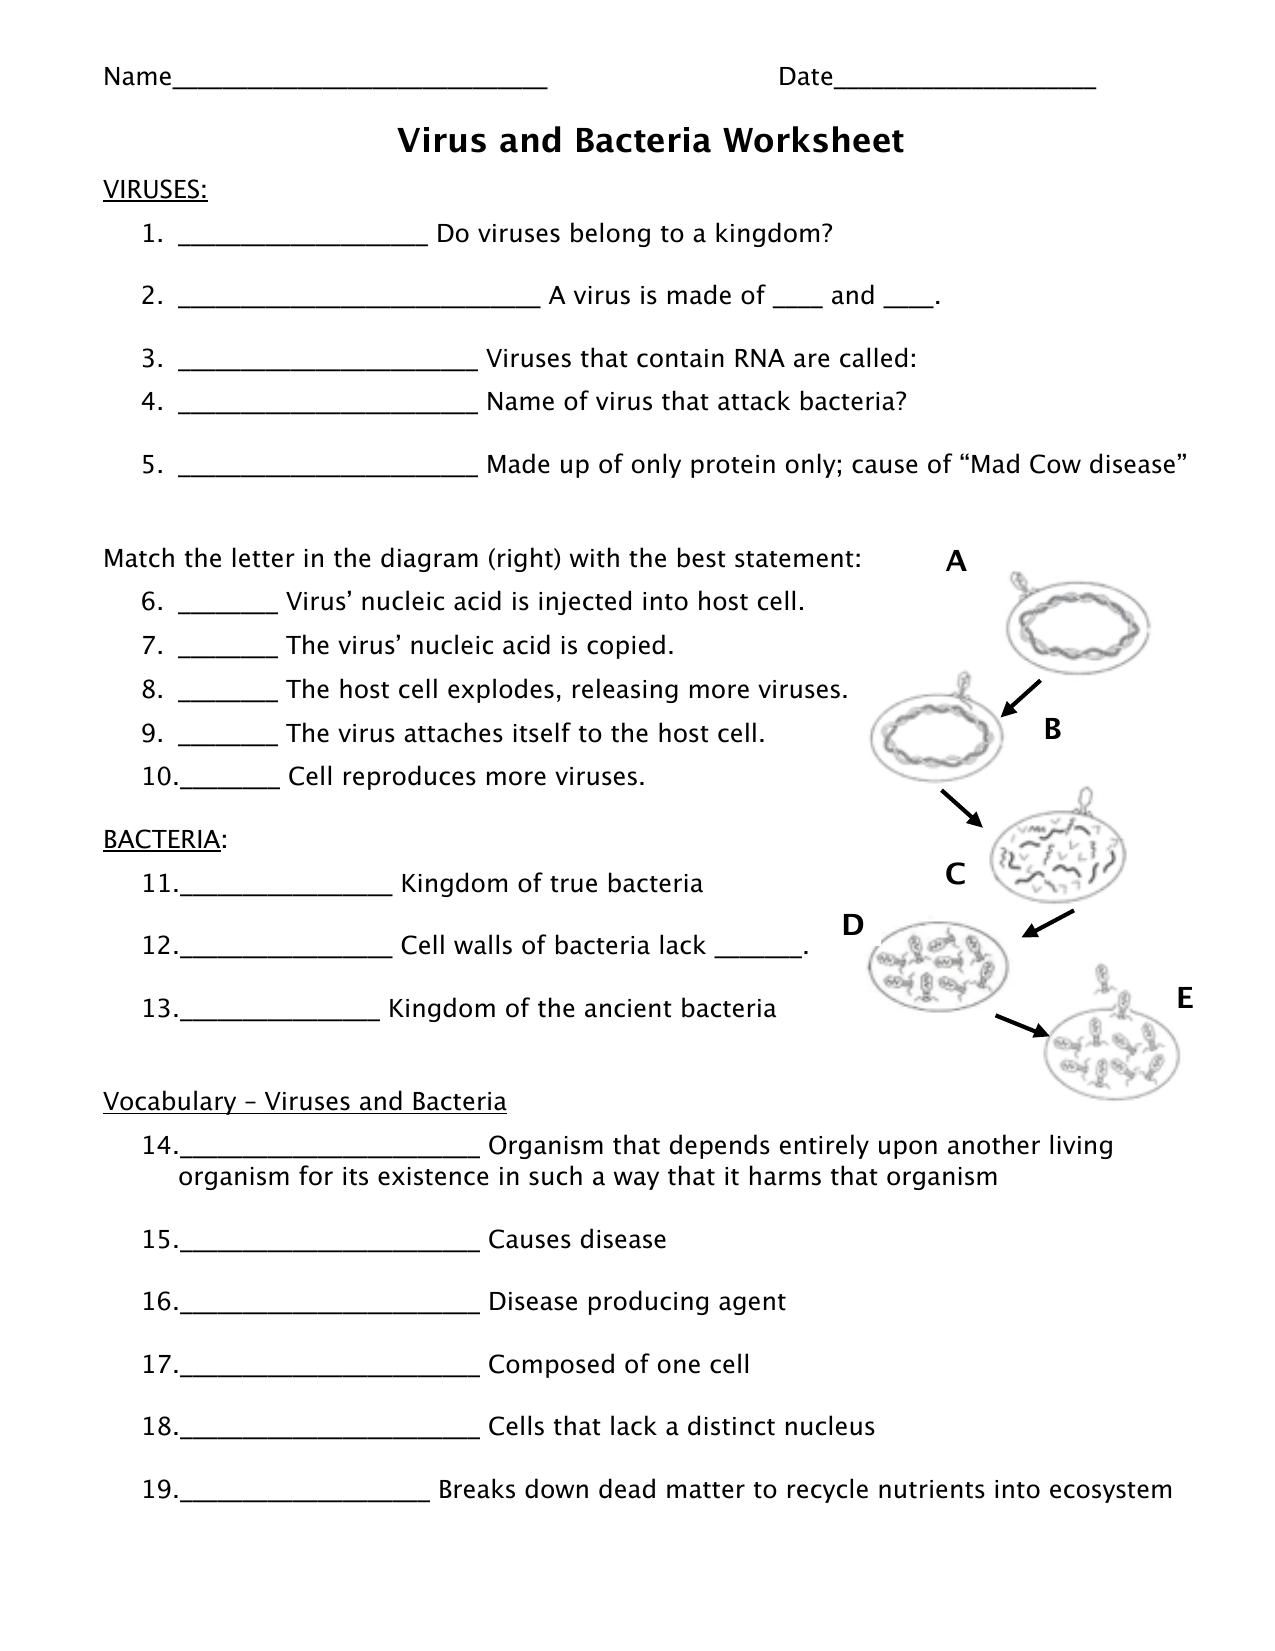 BACTERIA - Virus and Bacteria worksheet With Virus And Bacteria Worksheet Key